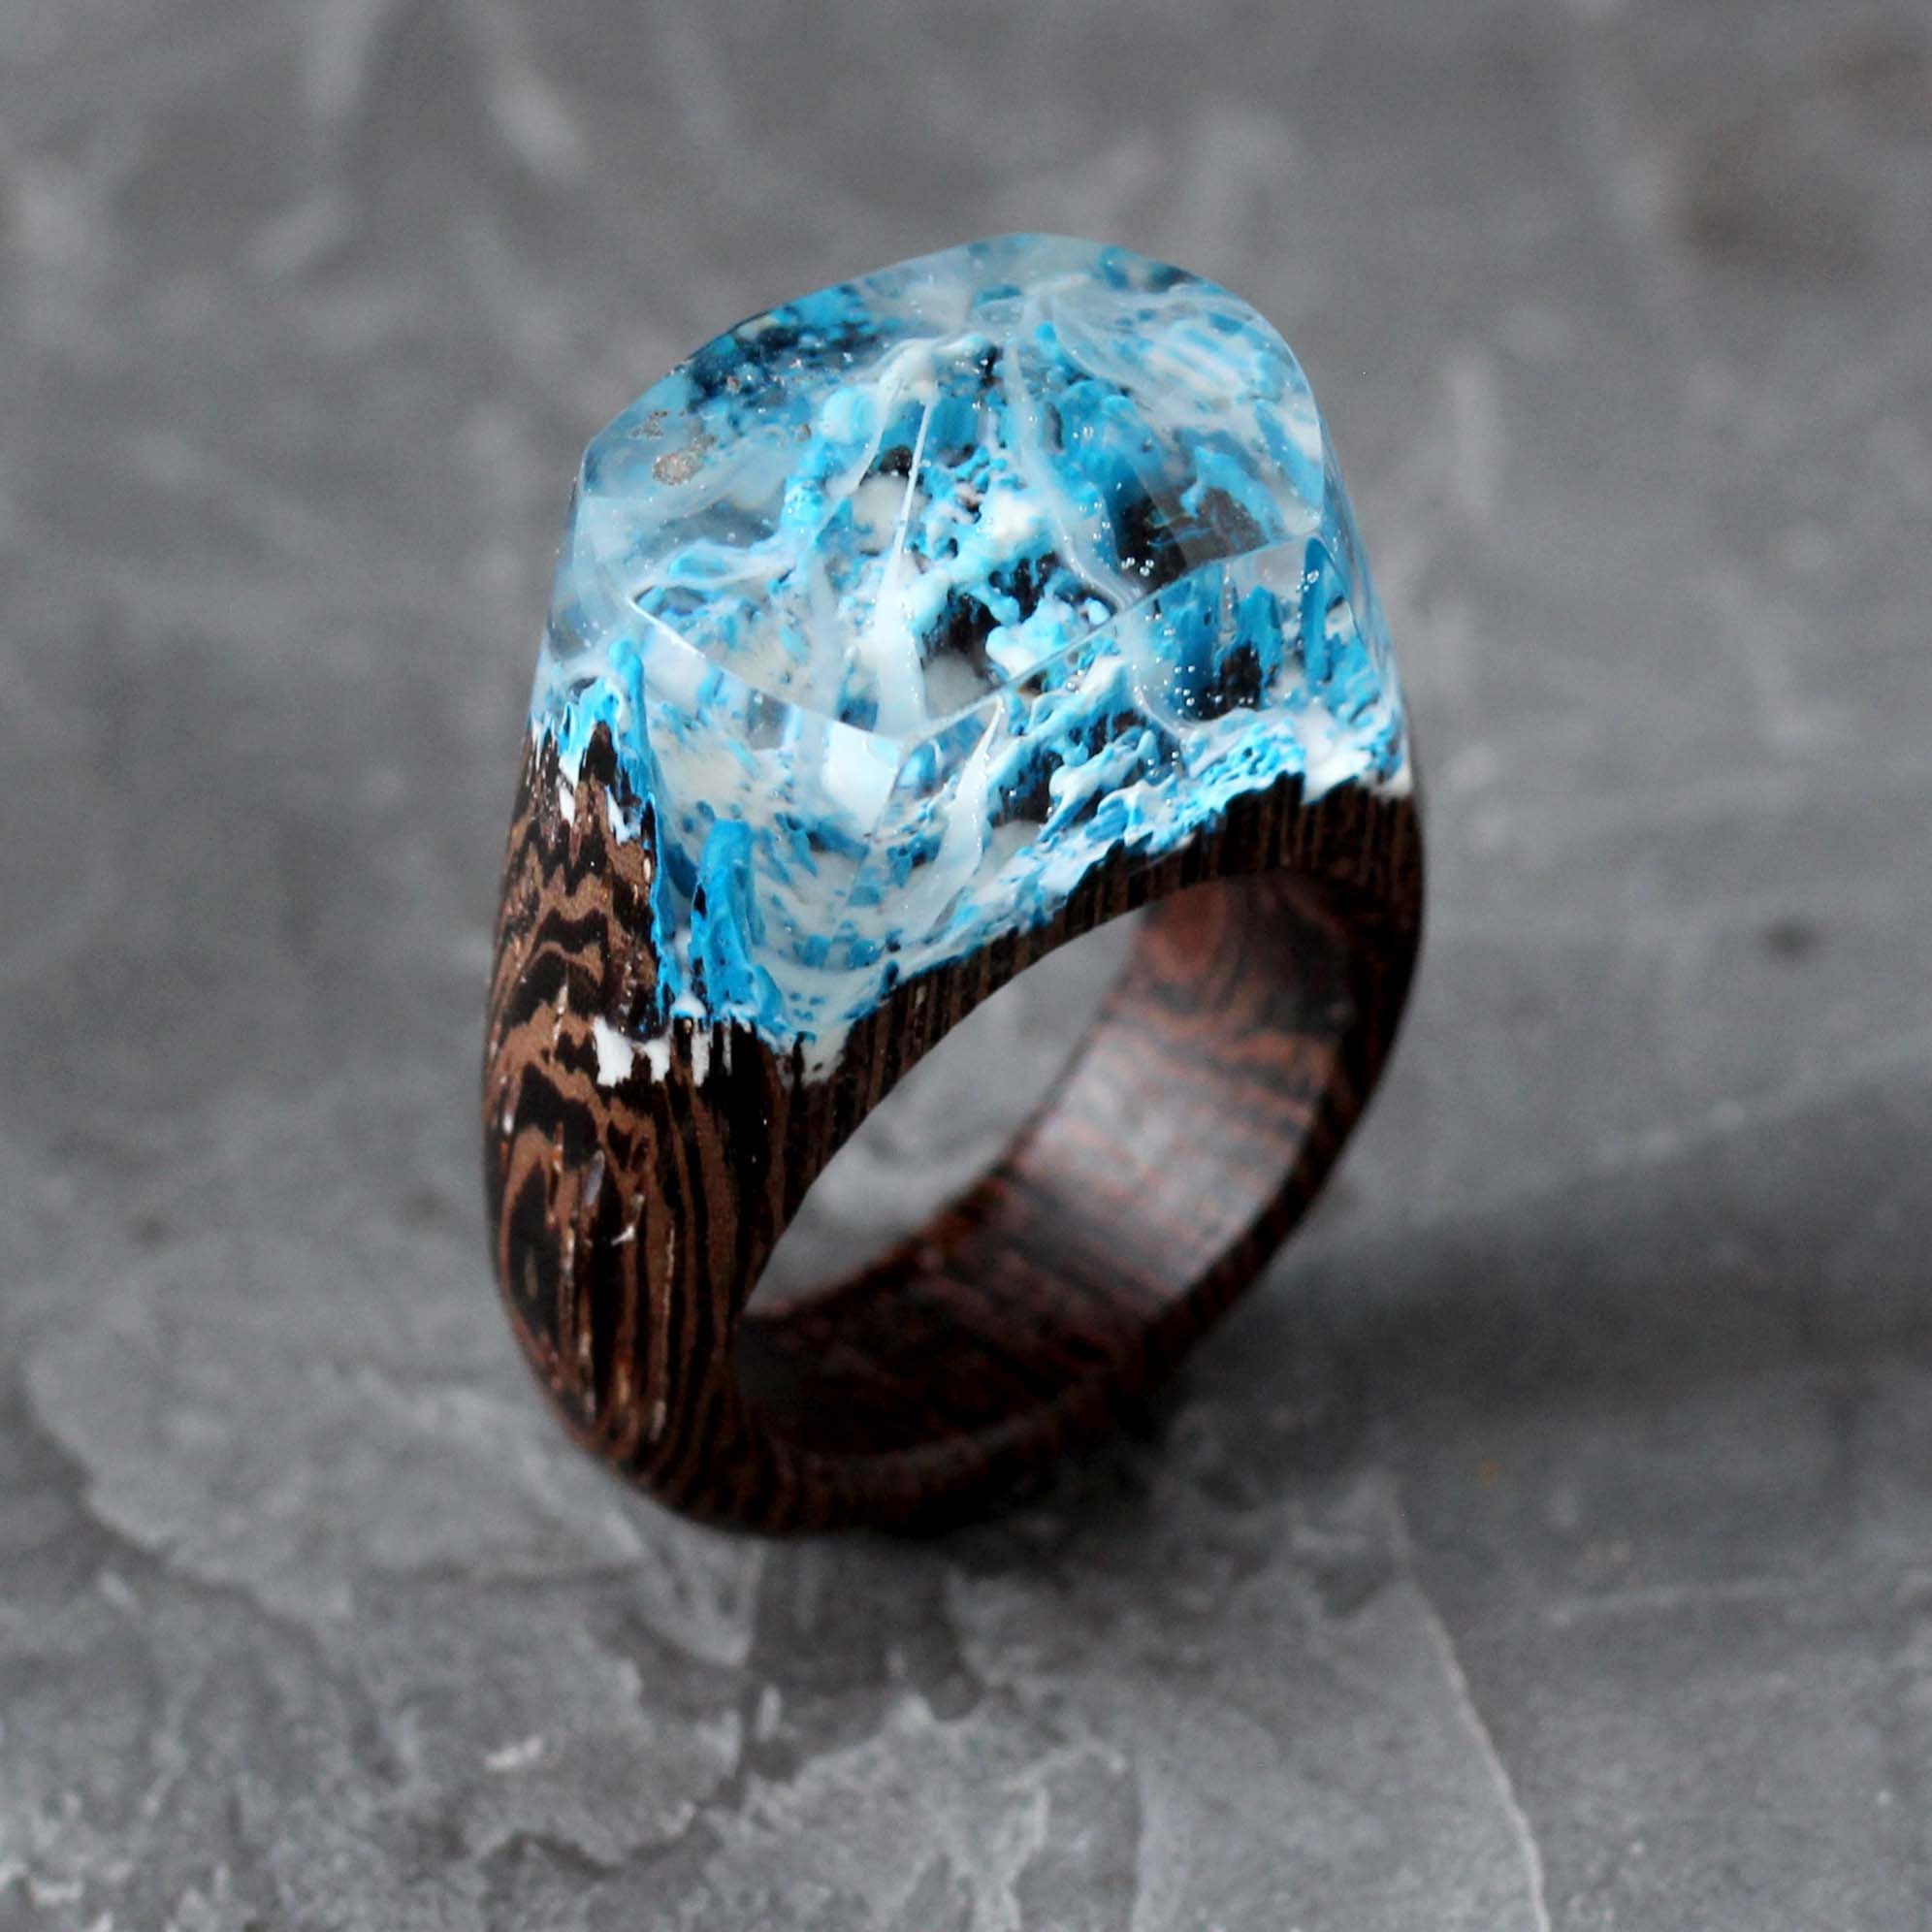 NDJEWELRY Resin Ring Wood Band Romantic Forest Secret World Mountain  Landscape insided Statement Ring Unique Handmade Gift for Her Size 6.5